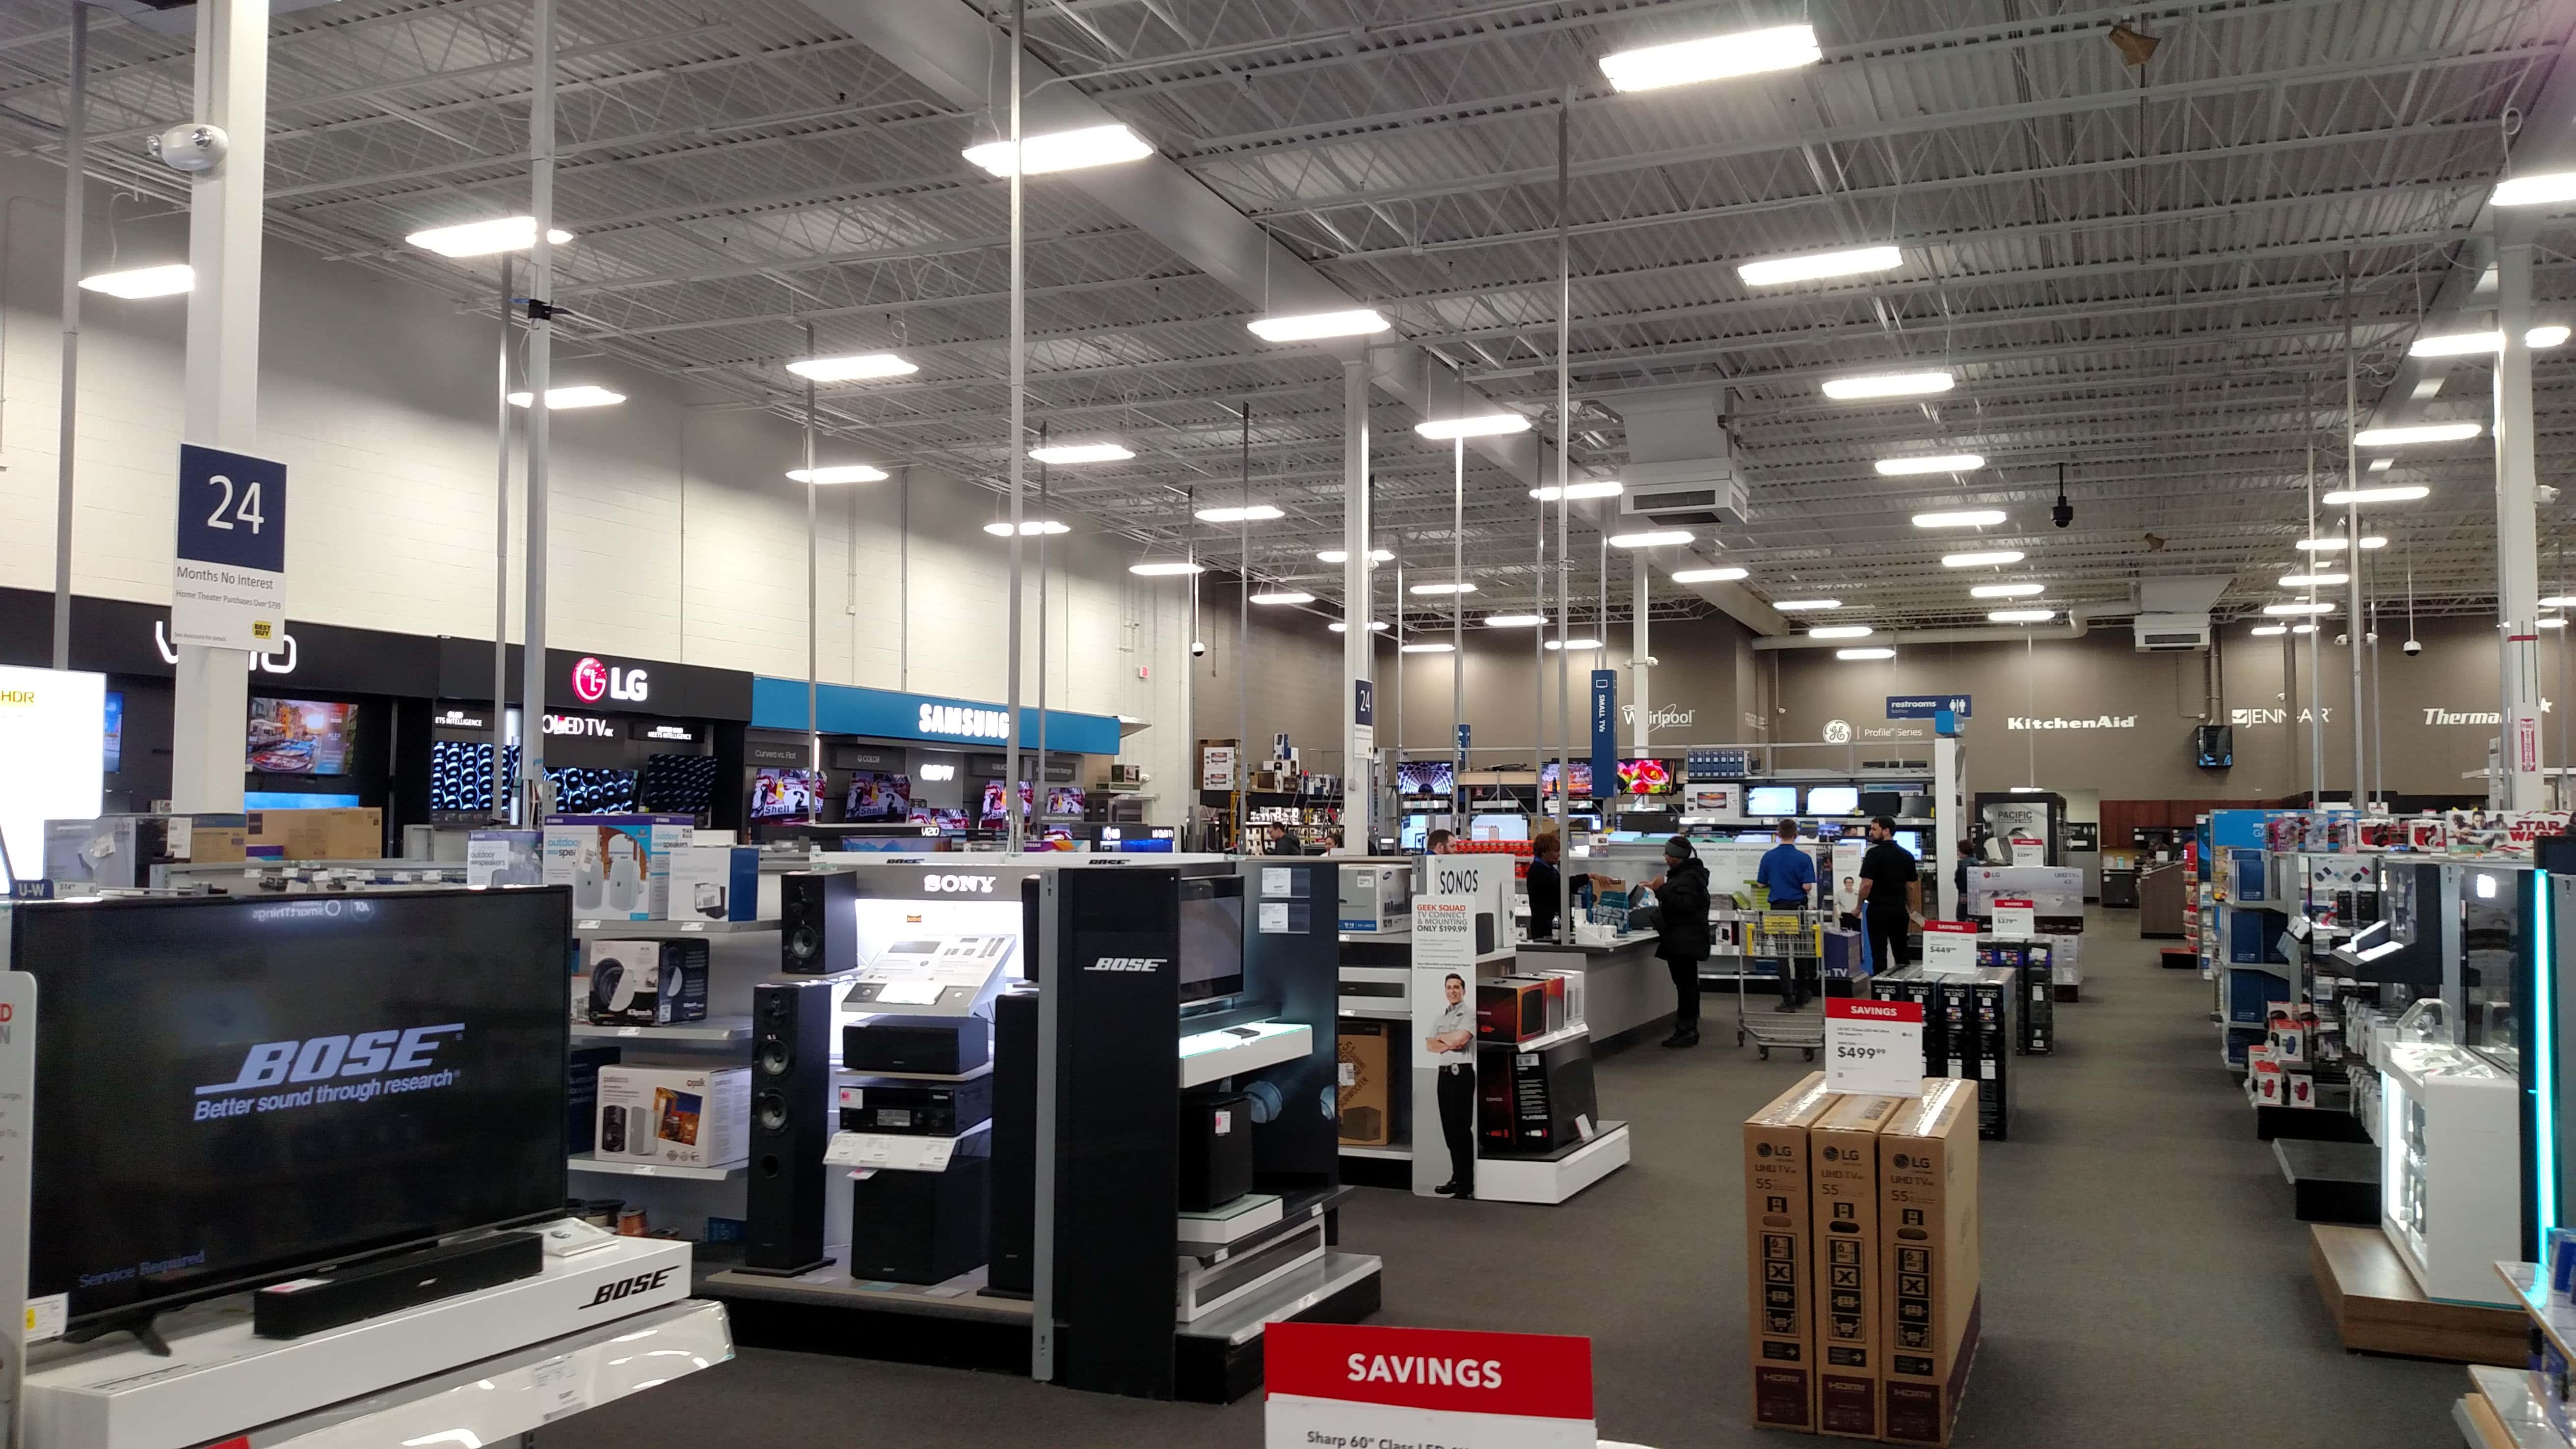 Magnolia - Merrillville (IN 46410), US, home electronics stores